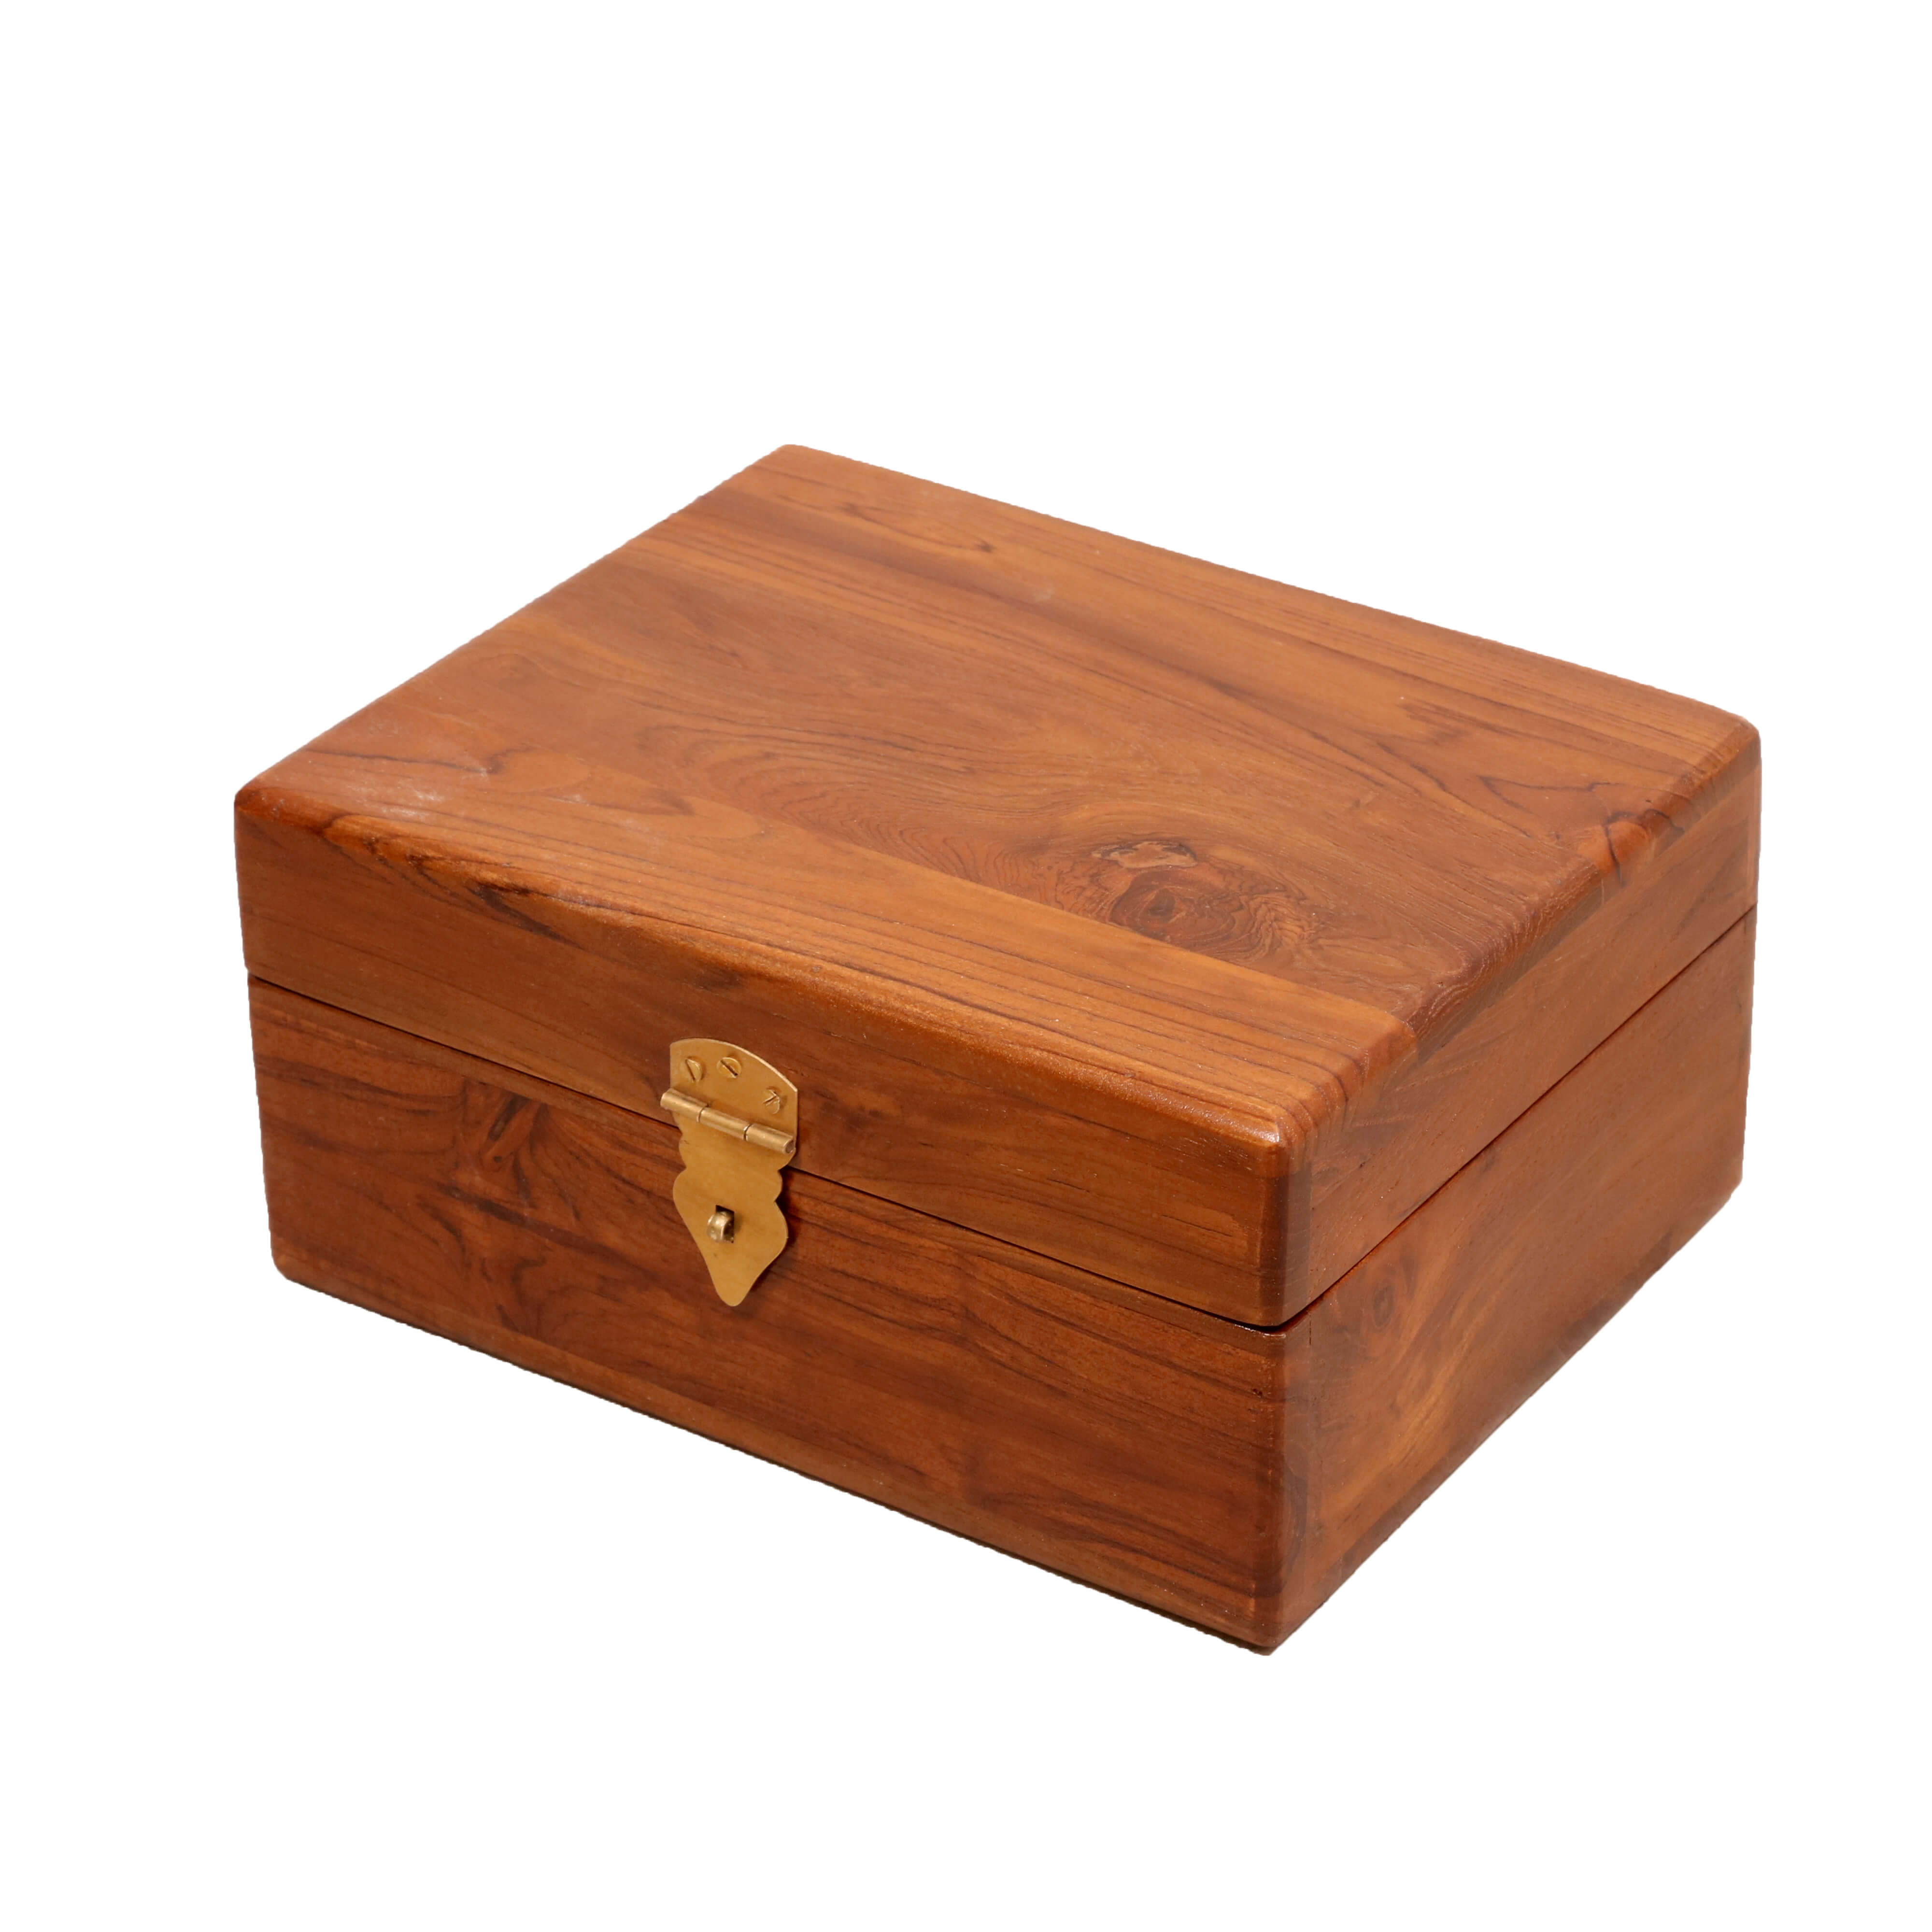 Two-compartment Jewellery Box Wooden Box